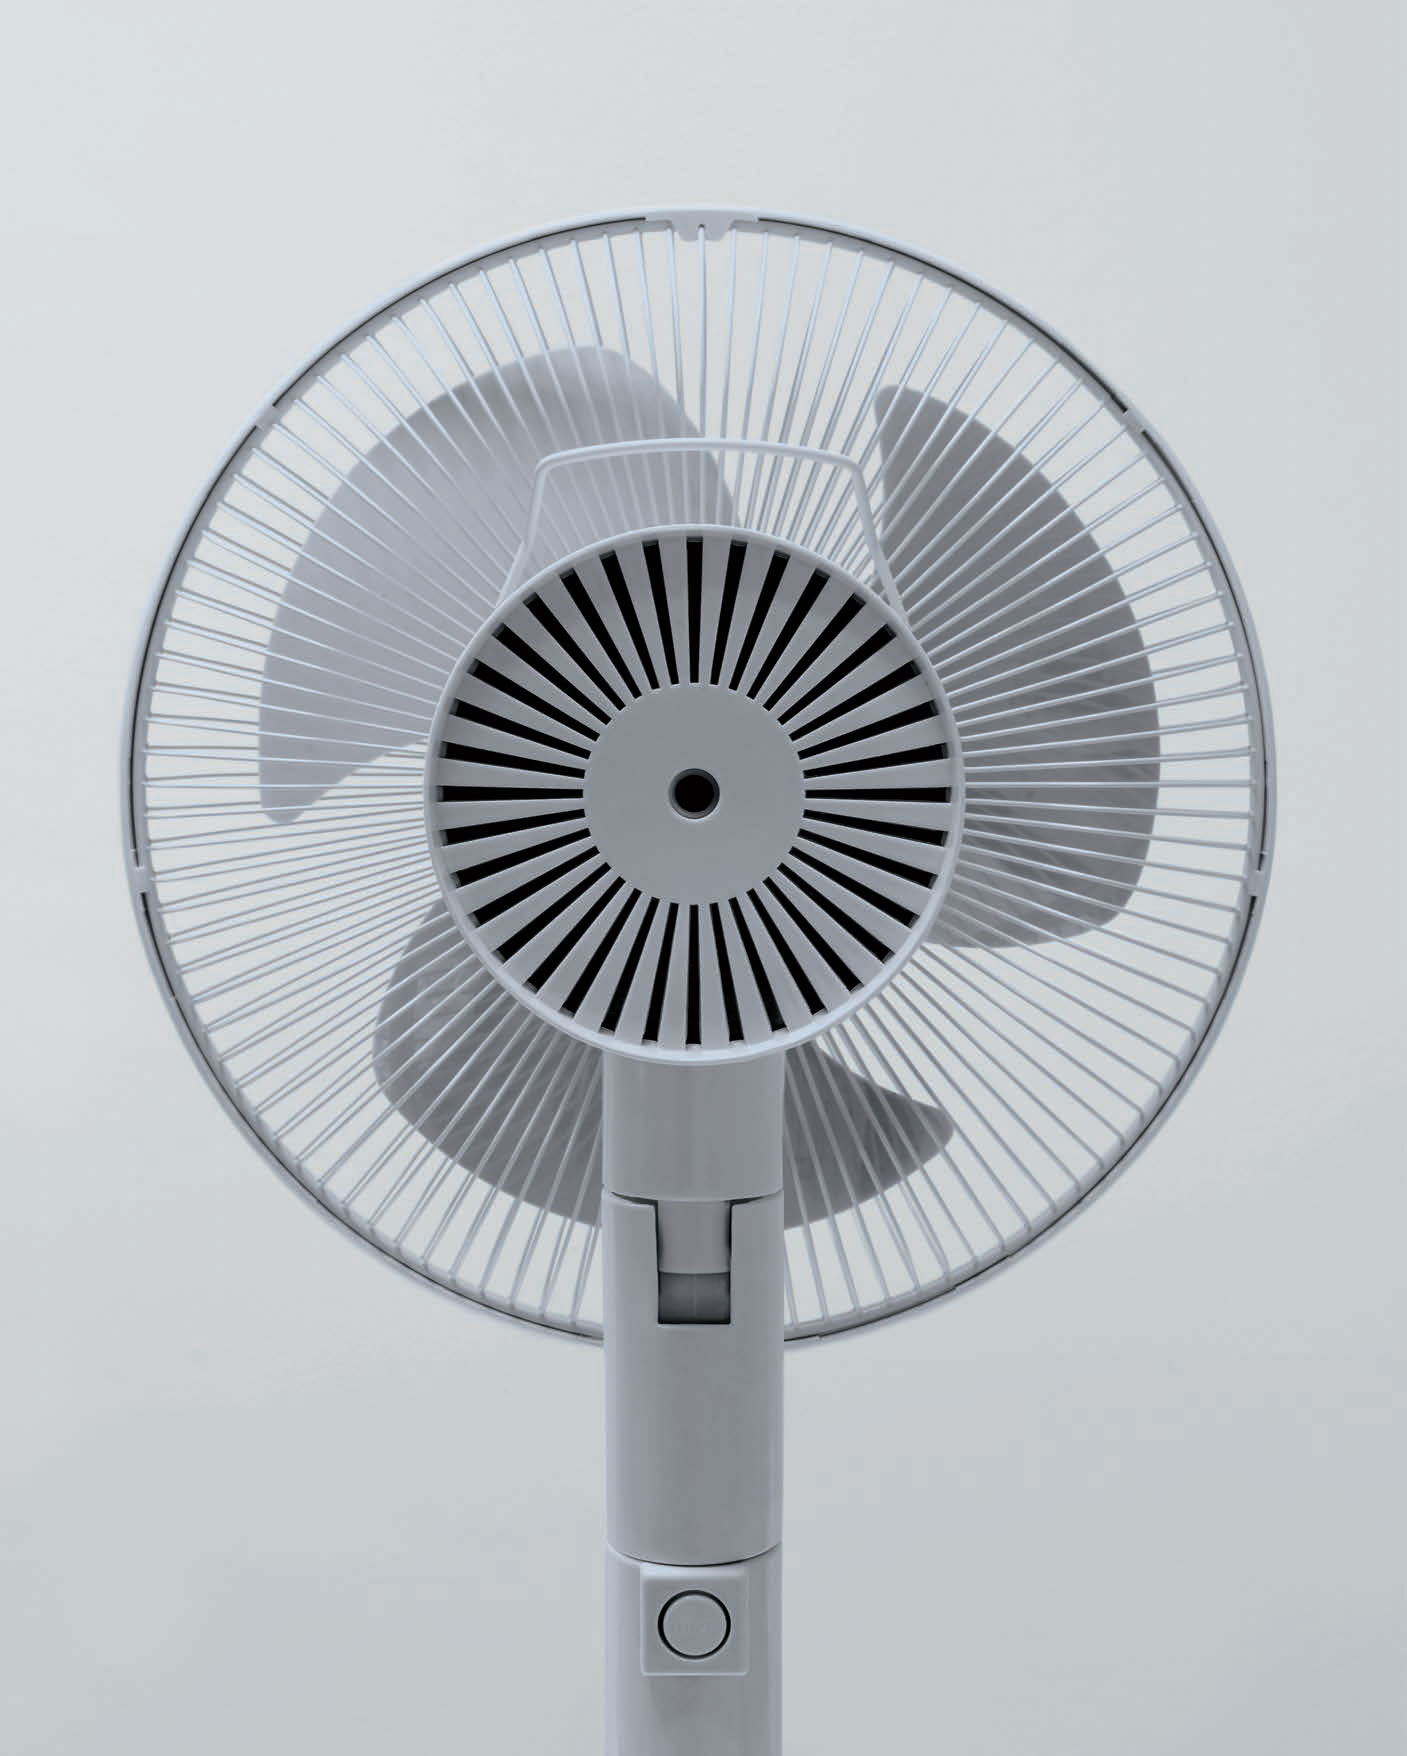 Fan, 2006, by Industrial Facility for Muji. As reproduced in Industrial Facility